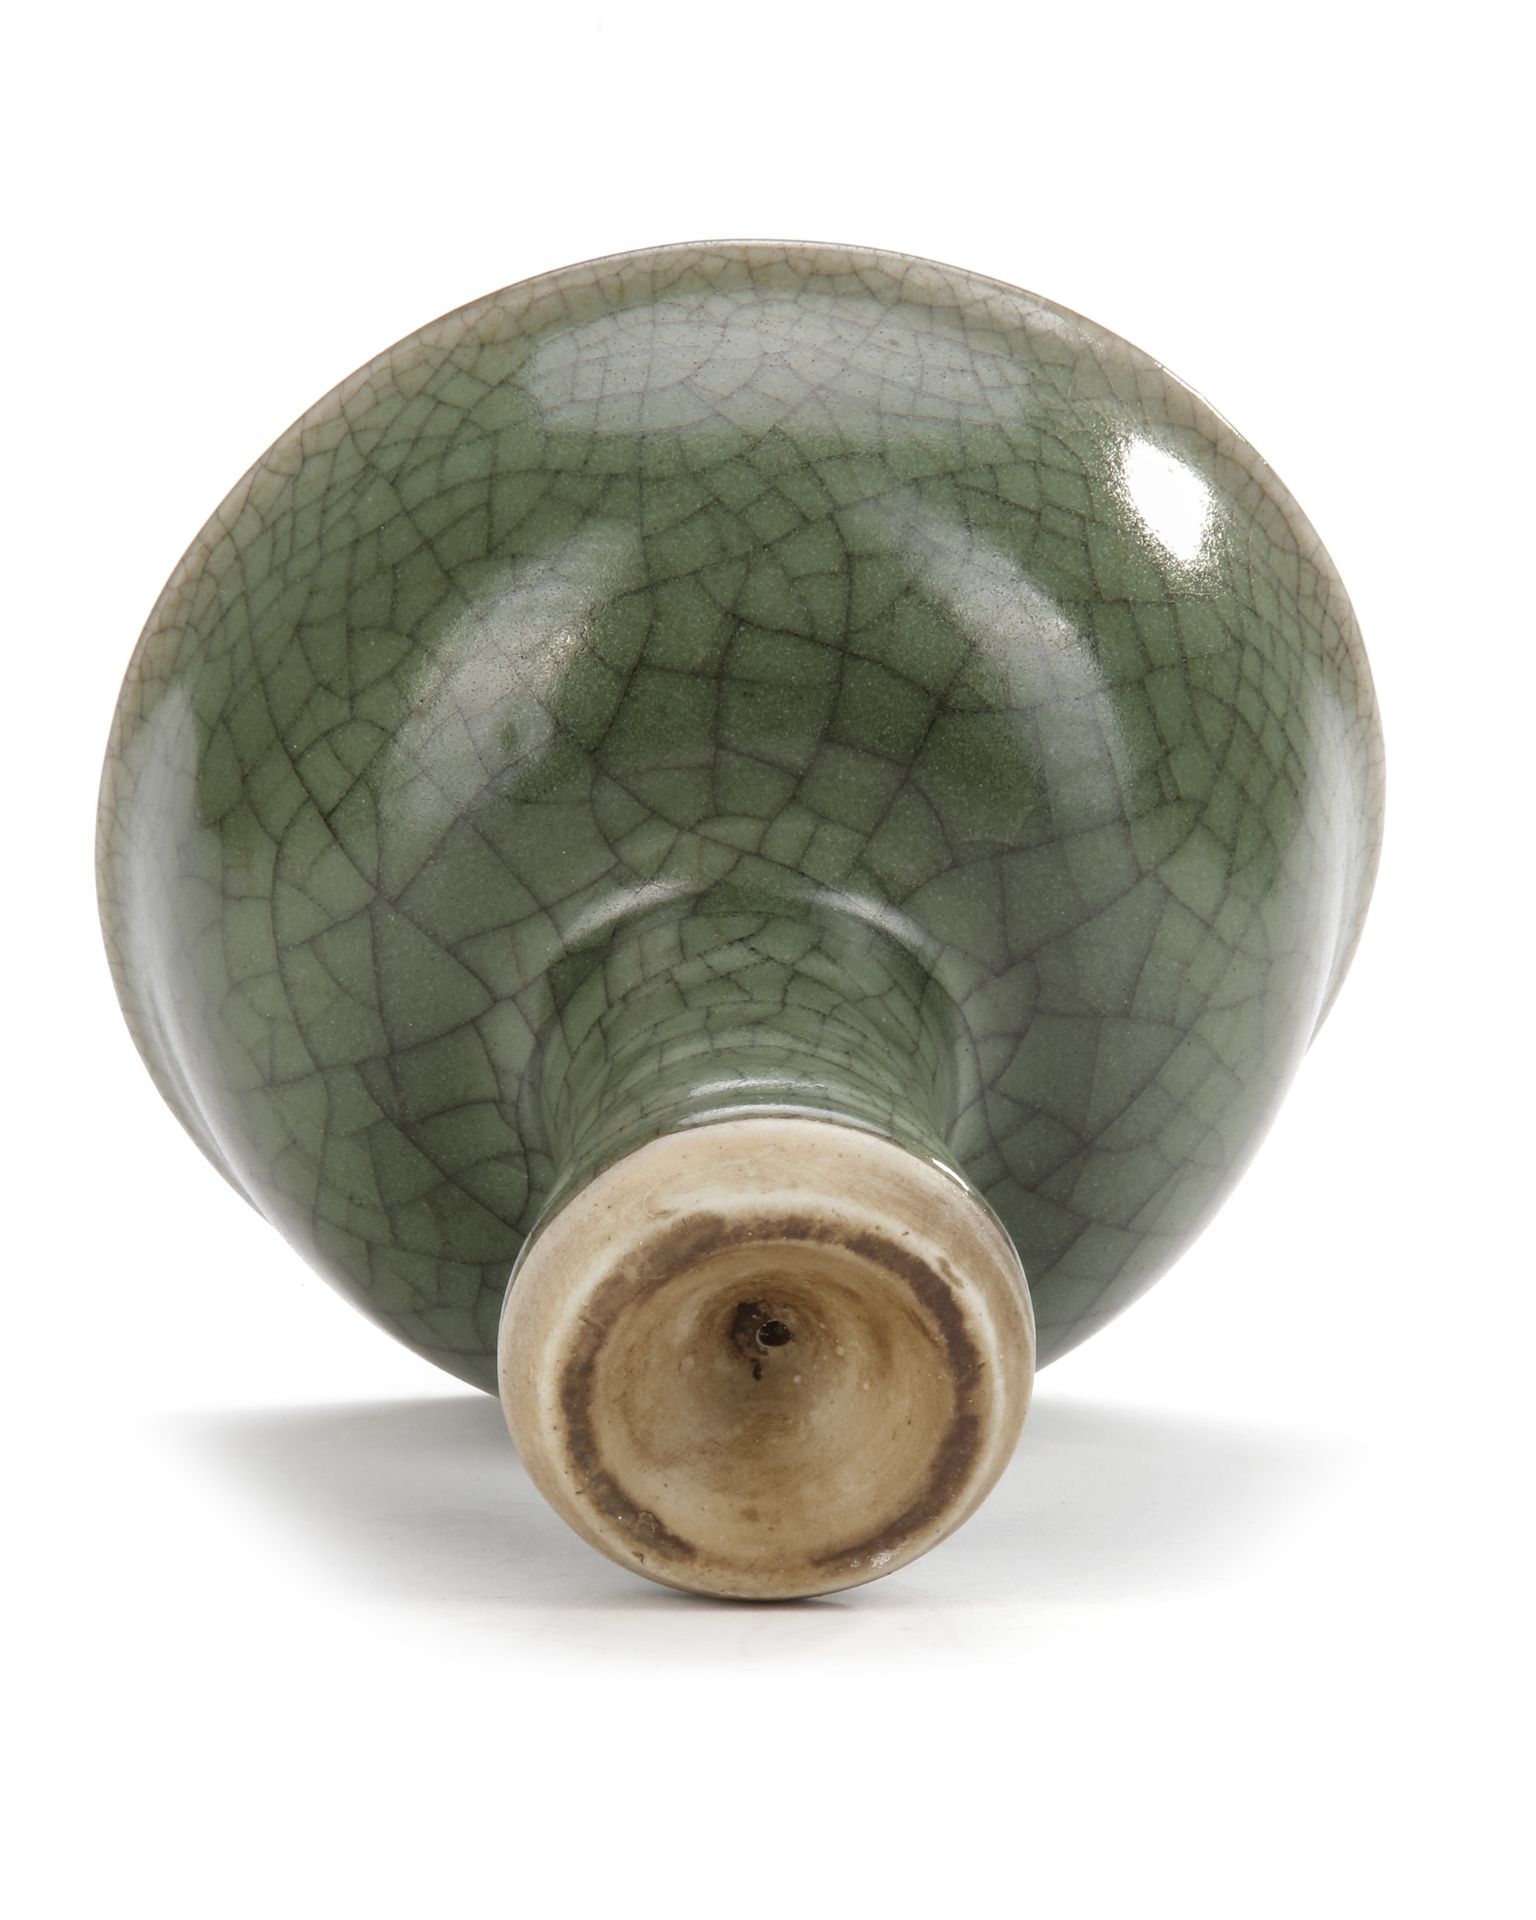 A CHINESE GUAN-TYPE CELADON STEM CUP, YUAN DYNASTY (1271-1368) - Image 3 of 4